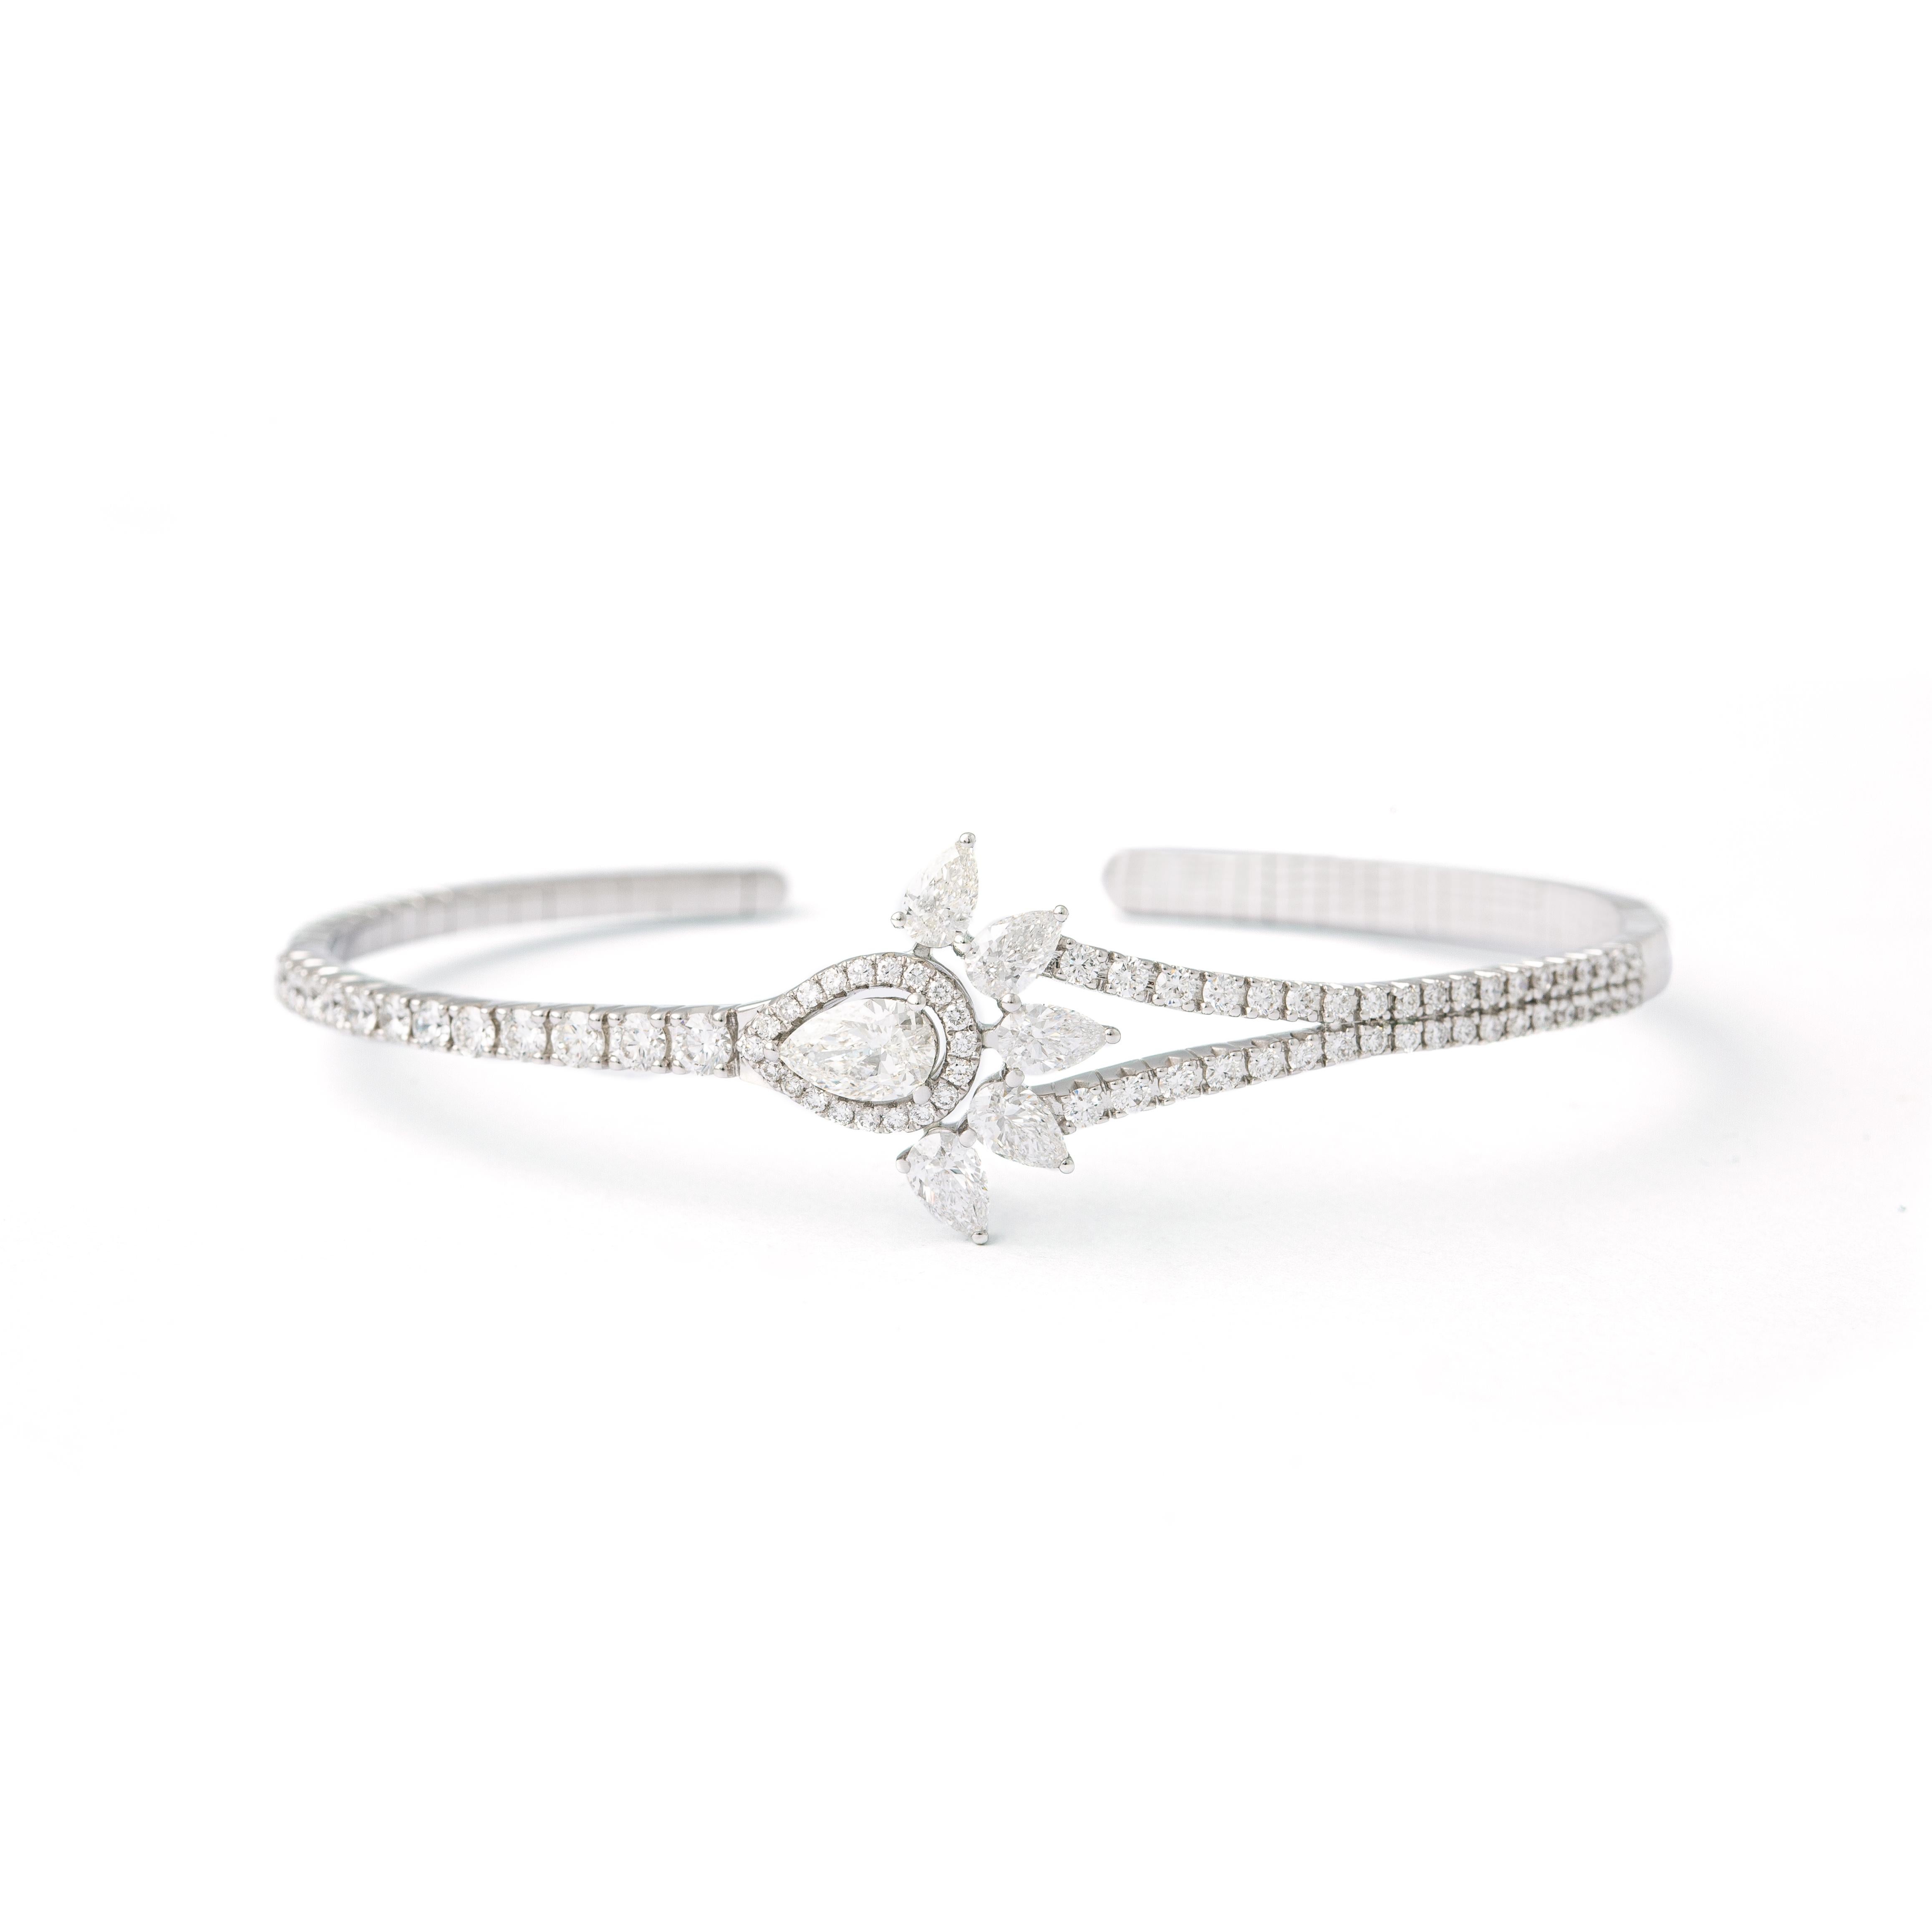 Bangle in 18kt white gold set with 6 pear-shaped diamonds 1.52 cts and 70 diamonds 1.22 cts.

Inner circumference: Approximately 17.58 centimeters ( 6.92 inches) up to 18.84 centimeters (7.42 inches).

Note: Flexible Bracelet.

Total weight: 14.63